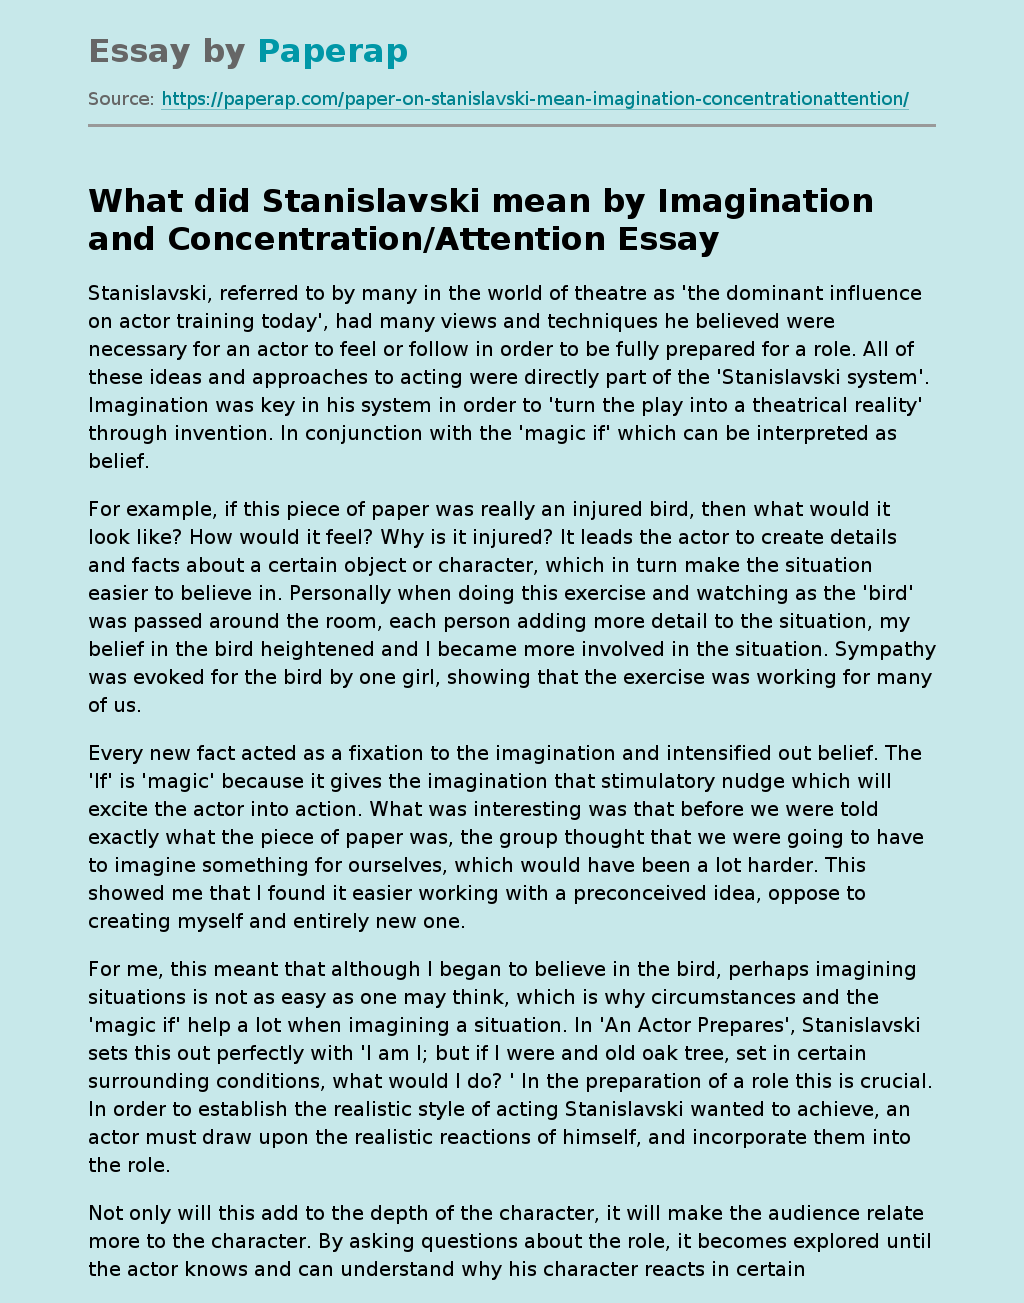 What did Stanislavski mean by Imagination and Concentration/Attention